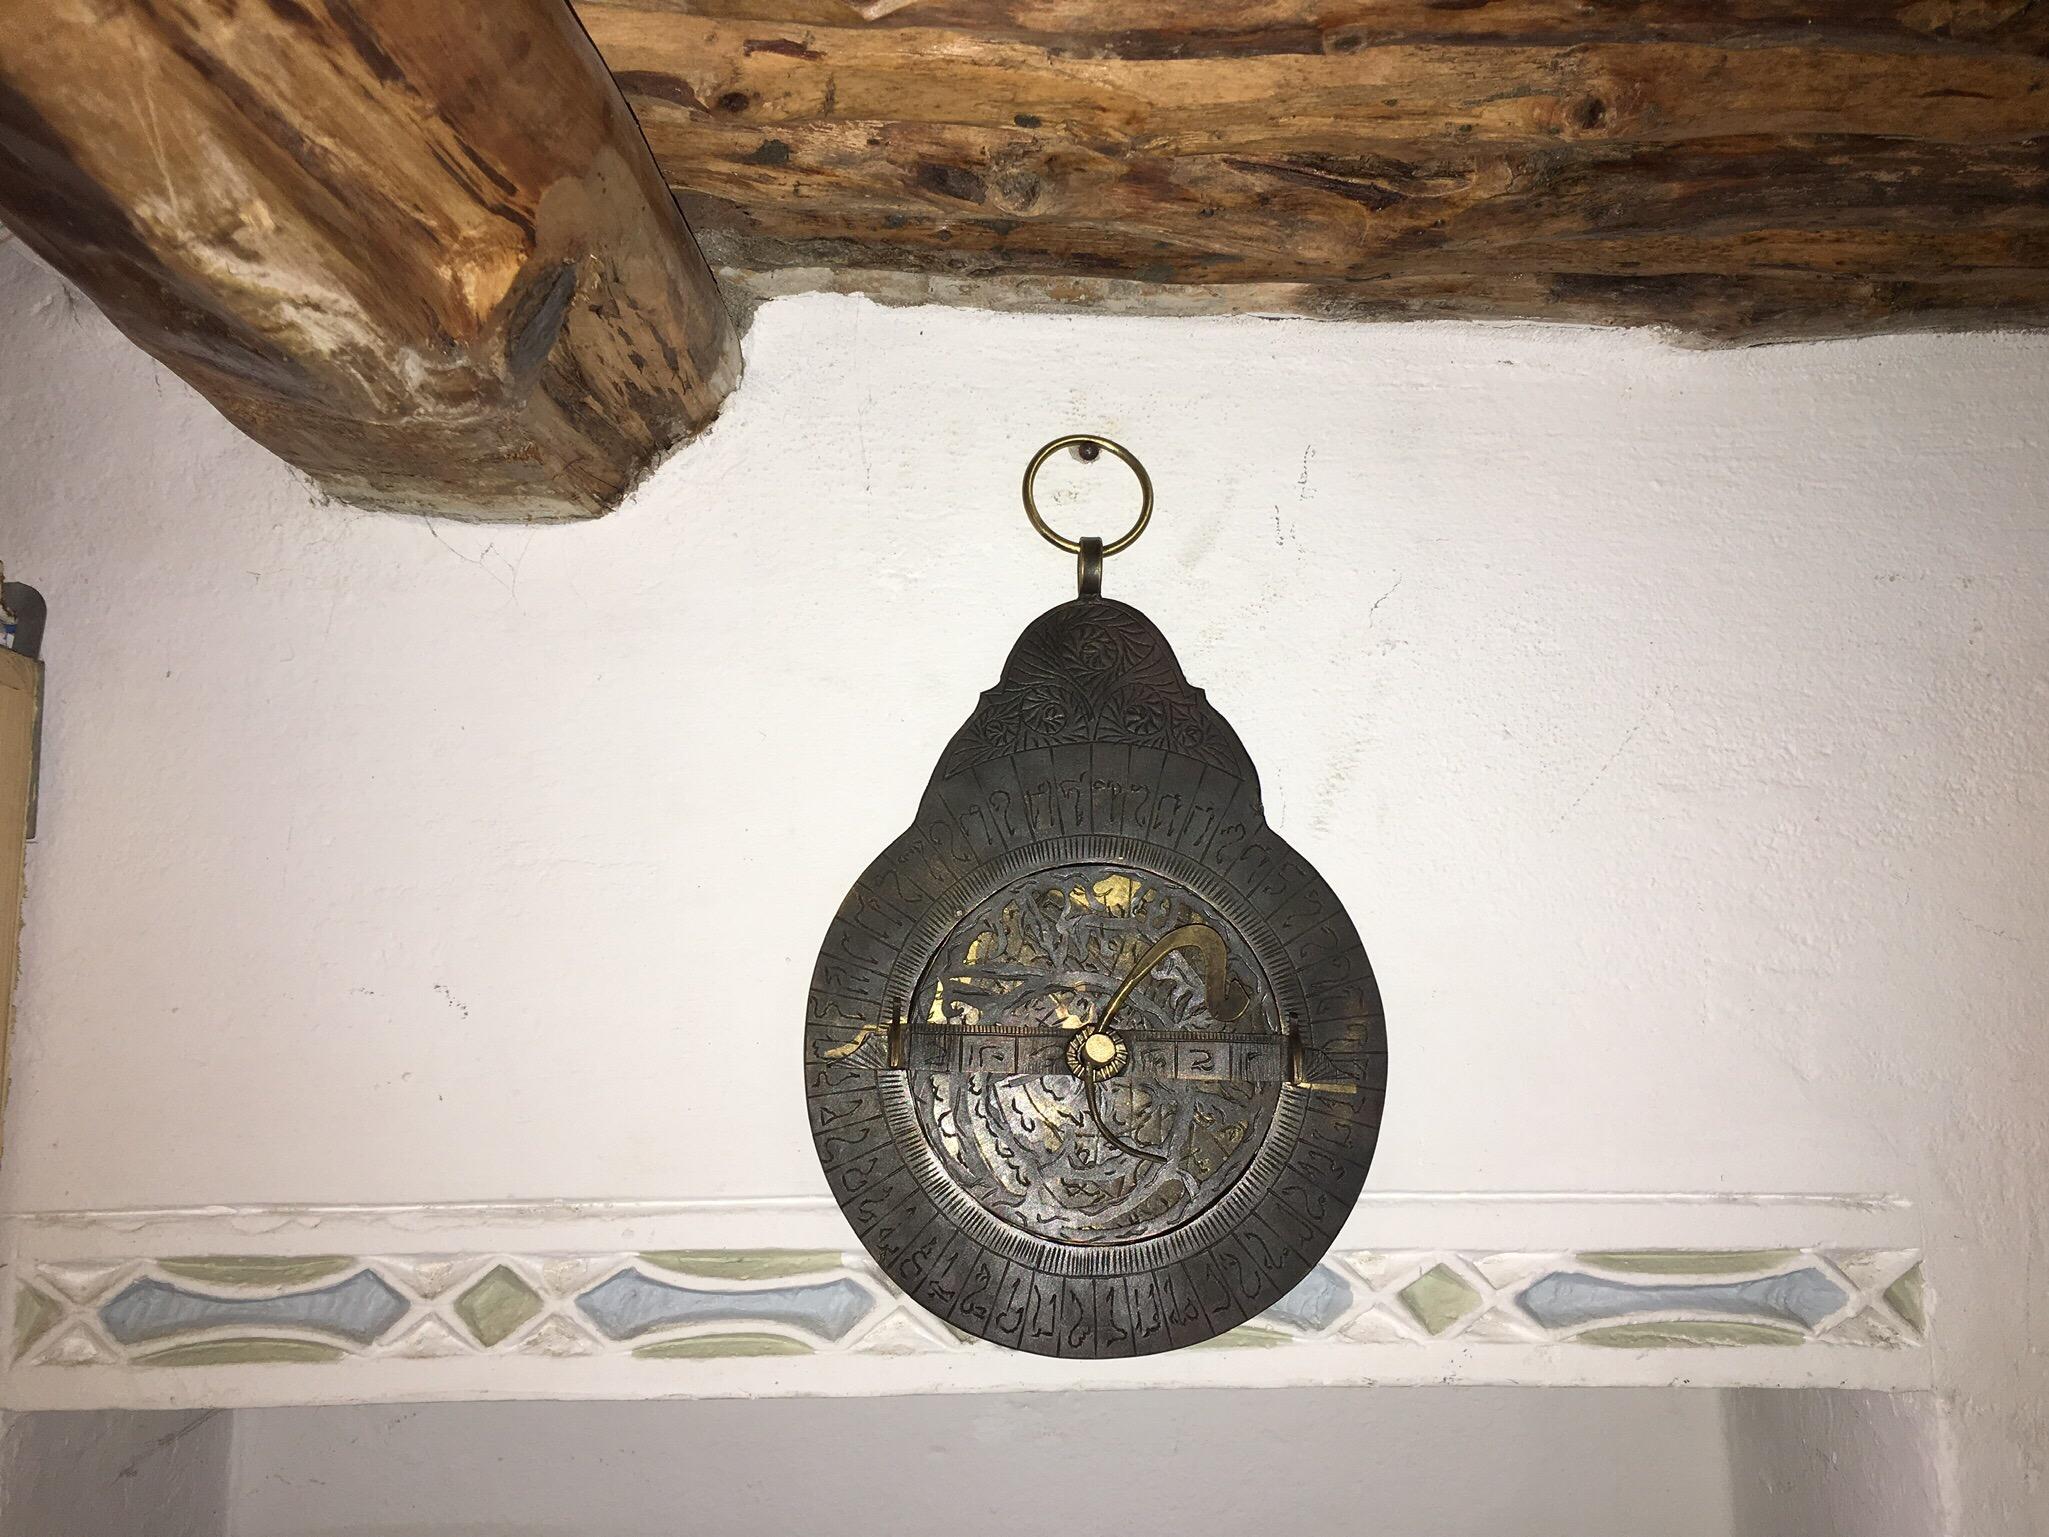 This antique Moroccan astrolabe was once used to cross the Sahara desert, among other things. It is made of brass, carefully and ornately etched with markings to indicate time, direction, star positions, and more. This amazing tool is considered the